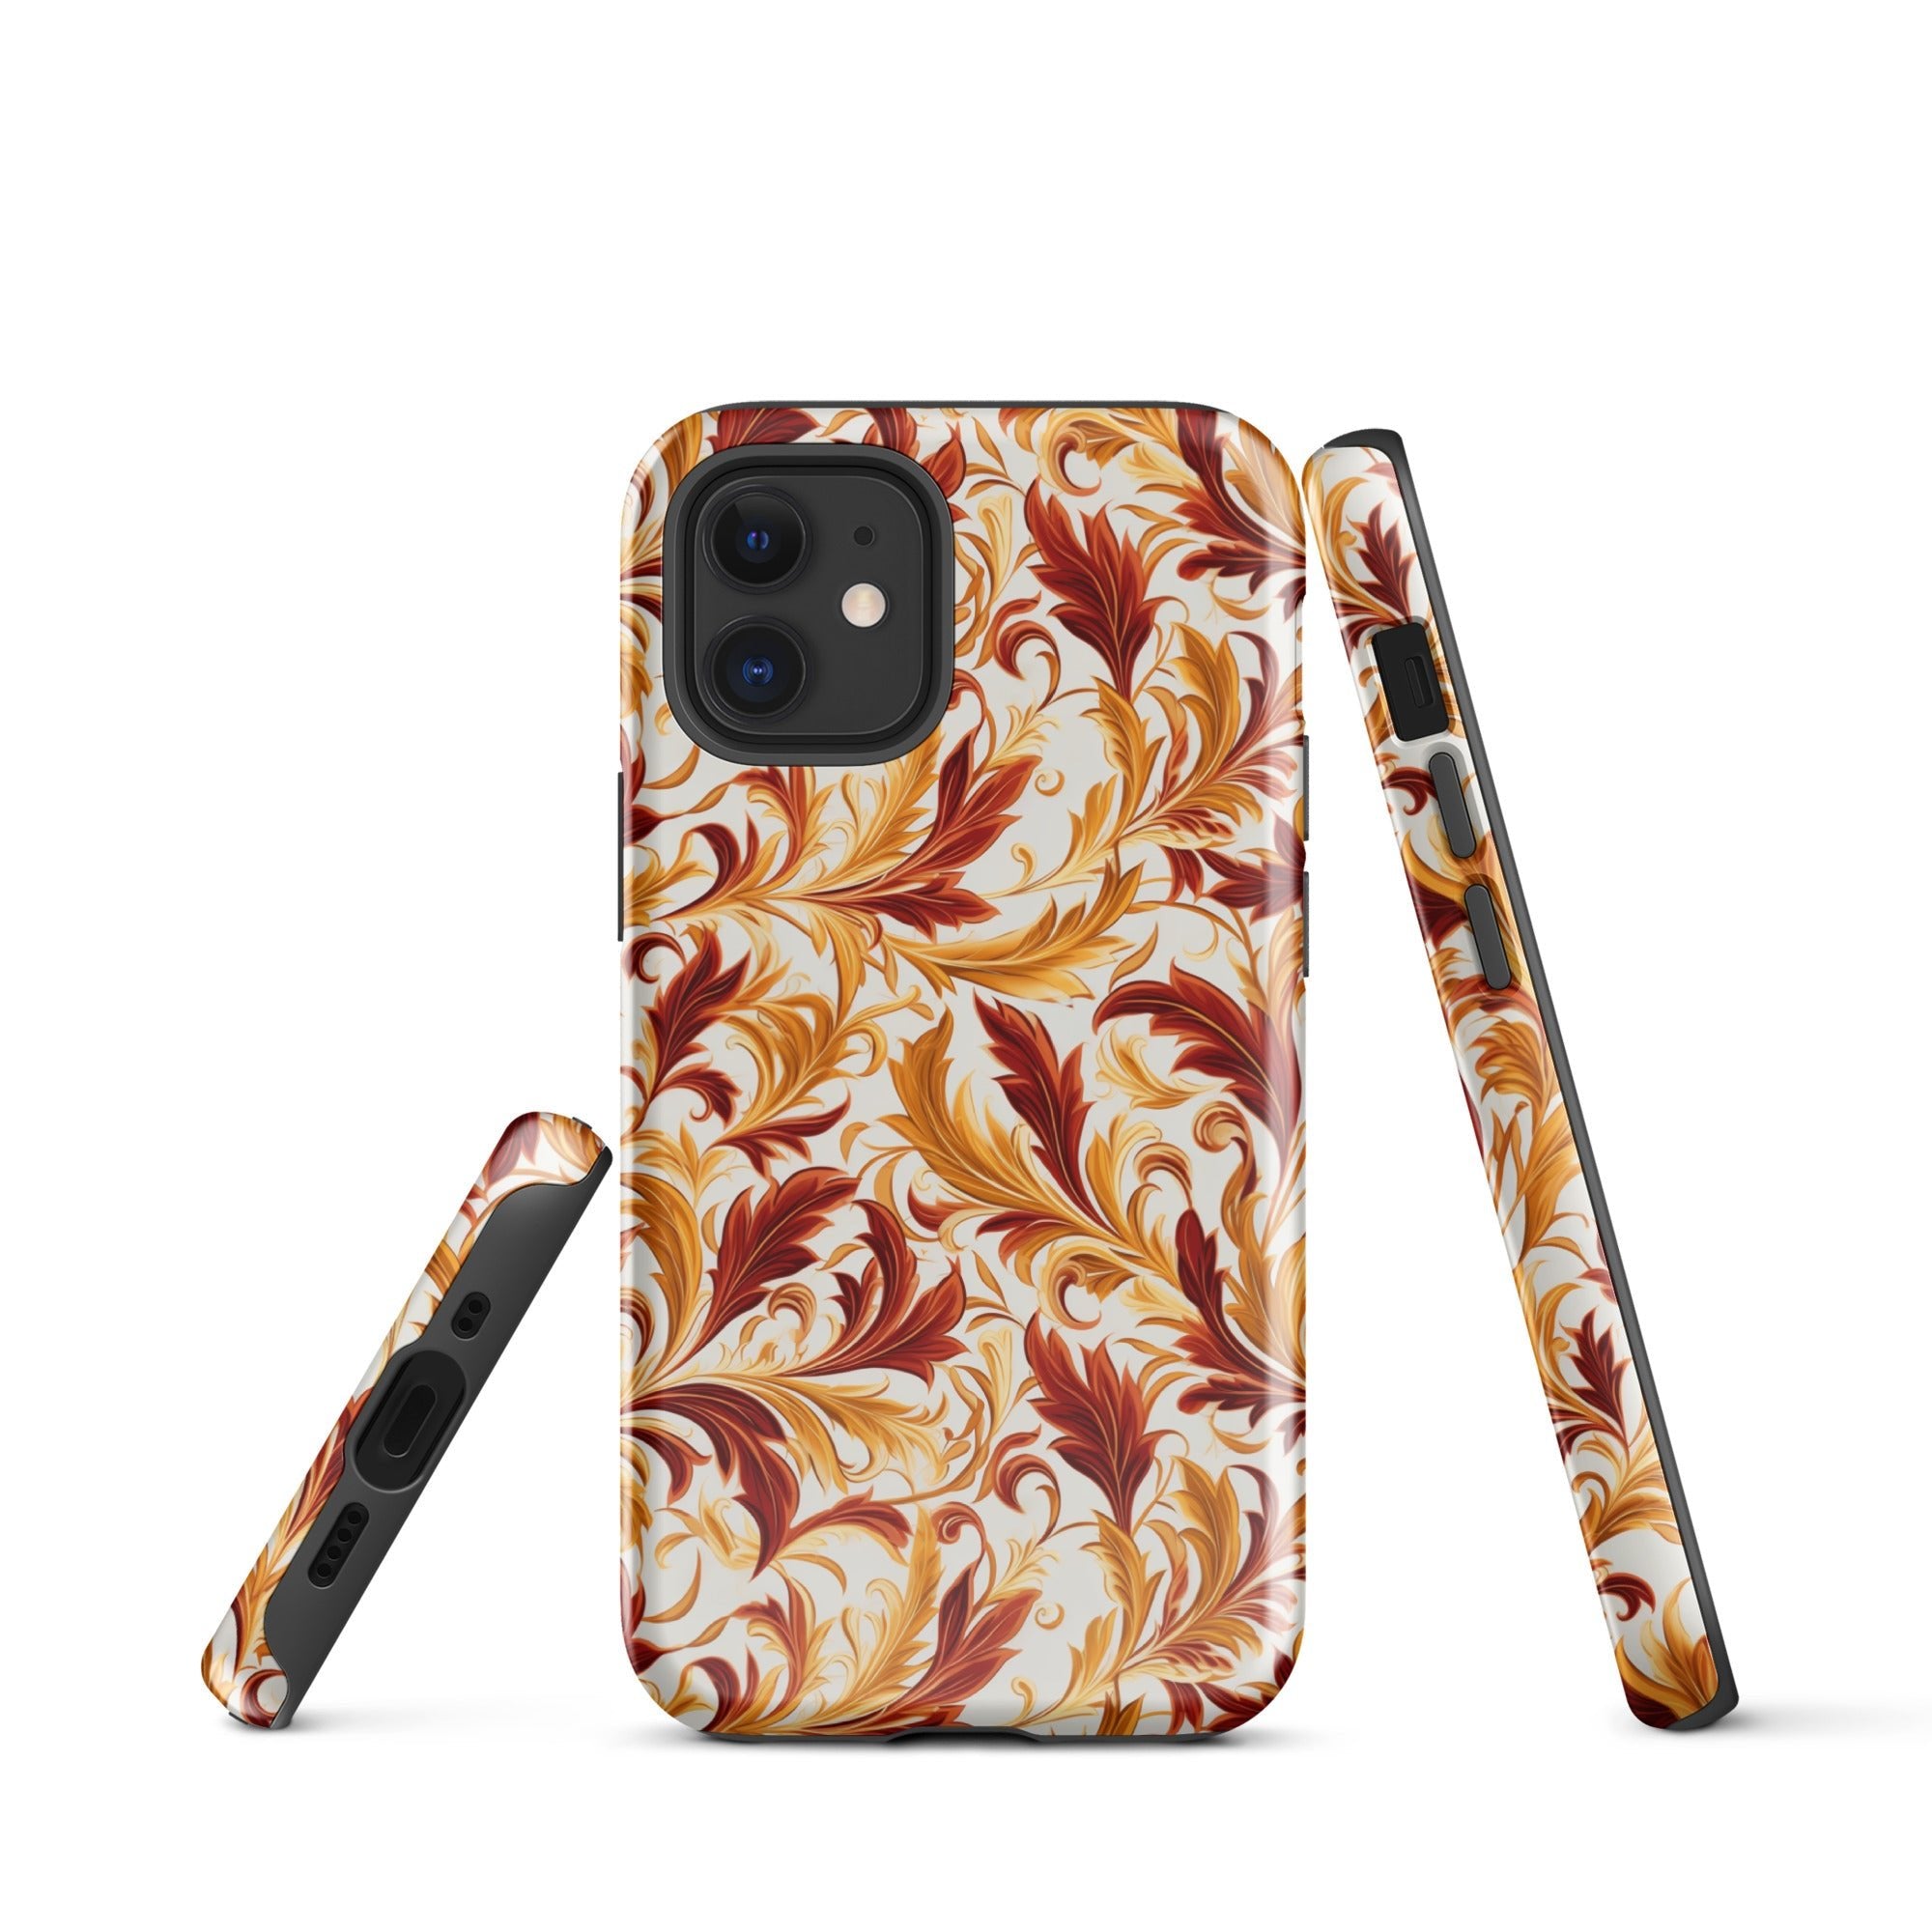 Swirling Autumn - Vortexes of Fall Foliage in Gold and Bronze - iPhone Case - Pattern Symphony